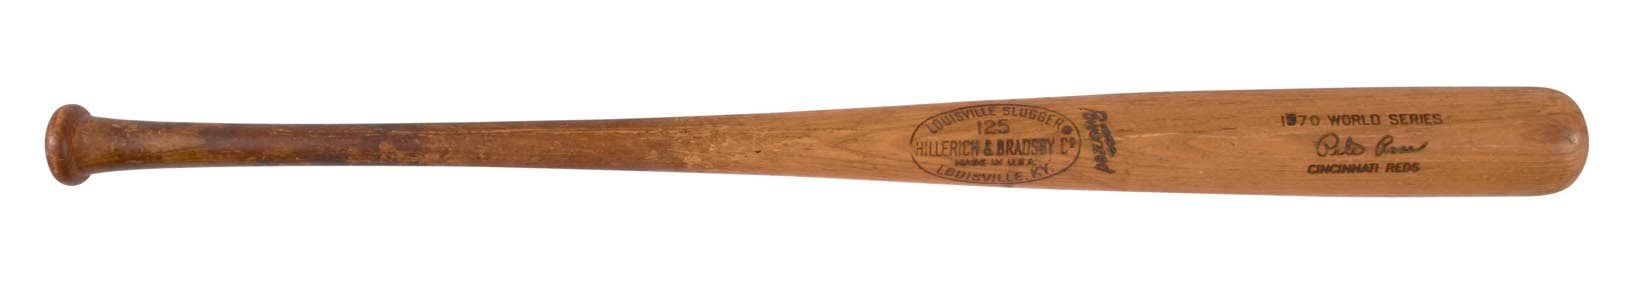 Bernie Stowe Cincinnati Reds Collection - 1970 Pete Rose World Series Game 4 Game Used Bat - HR Game (Photo-Matched)